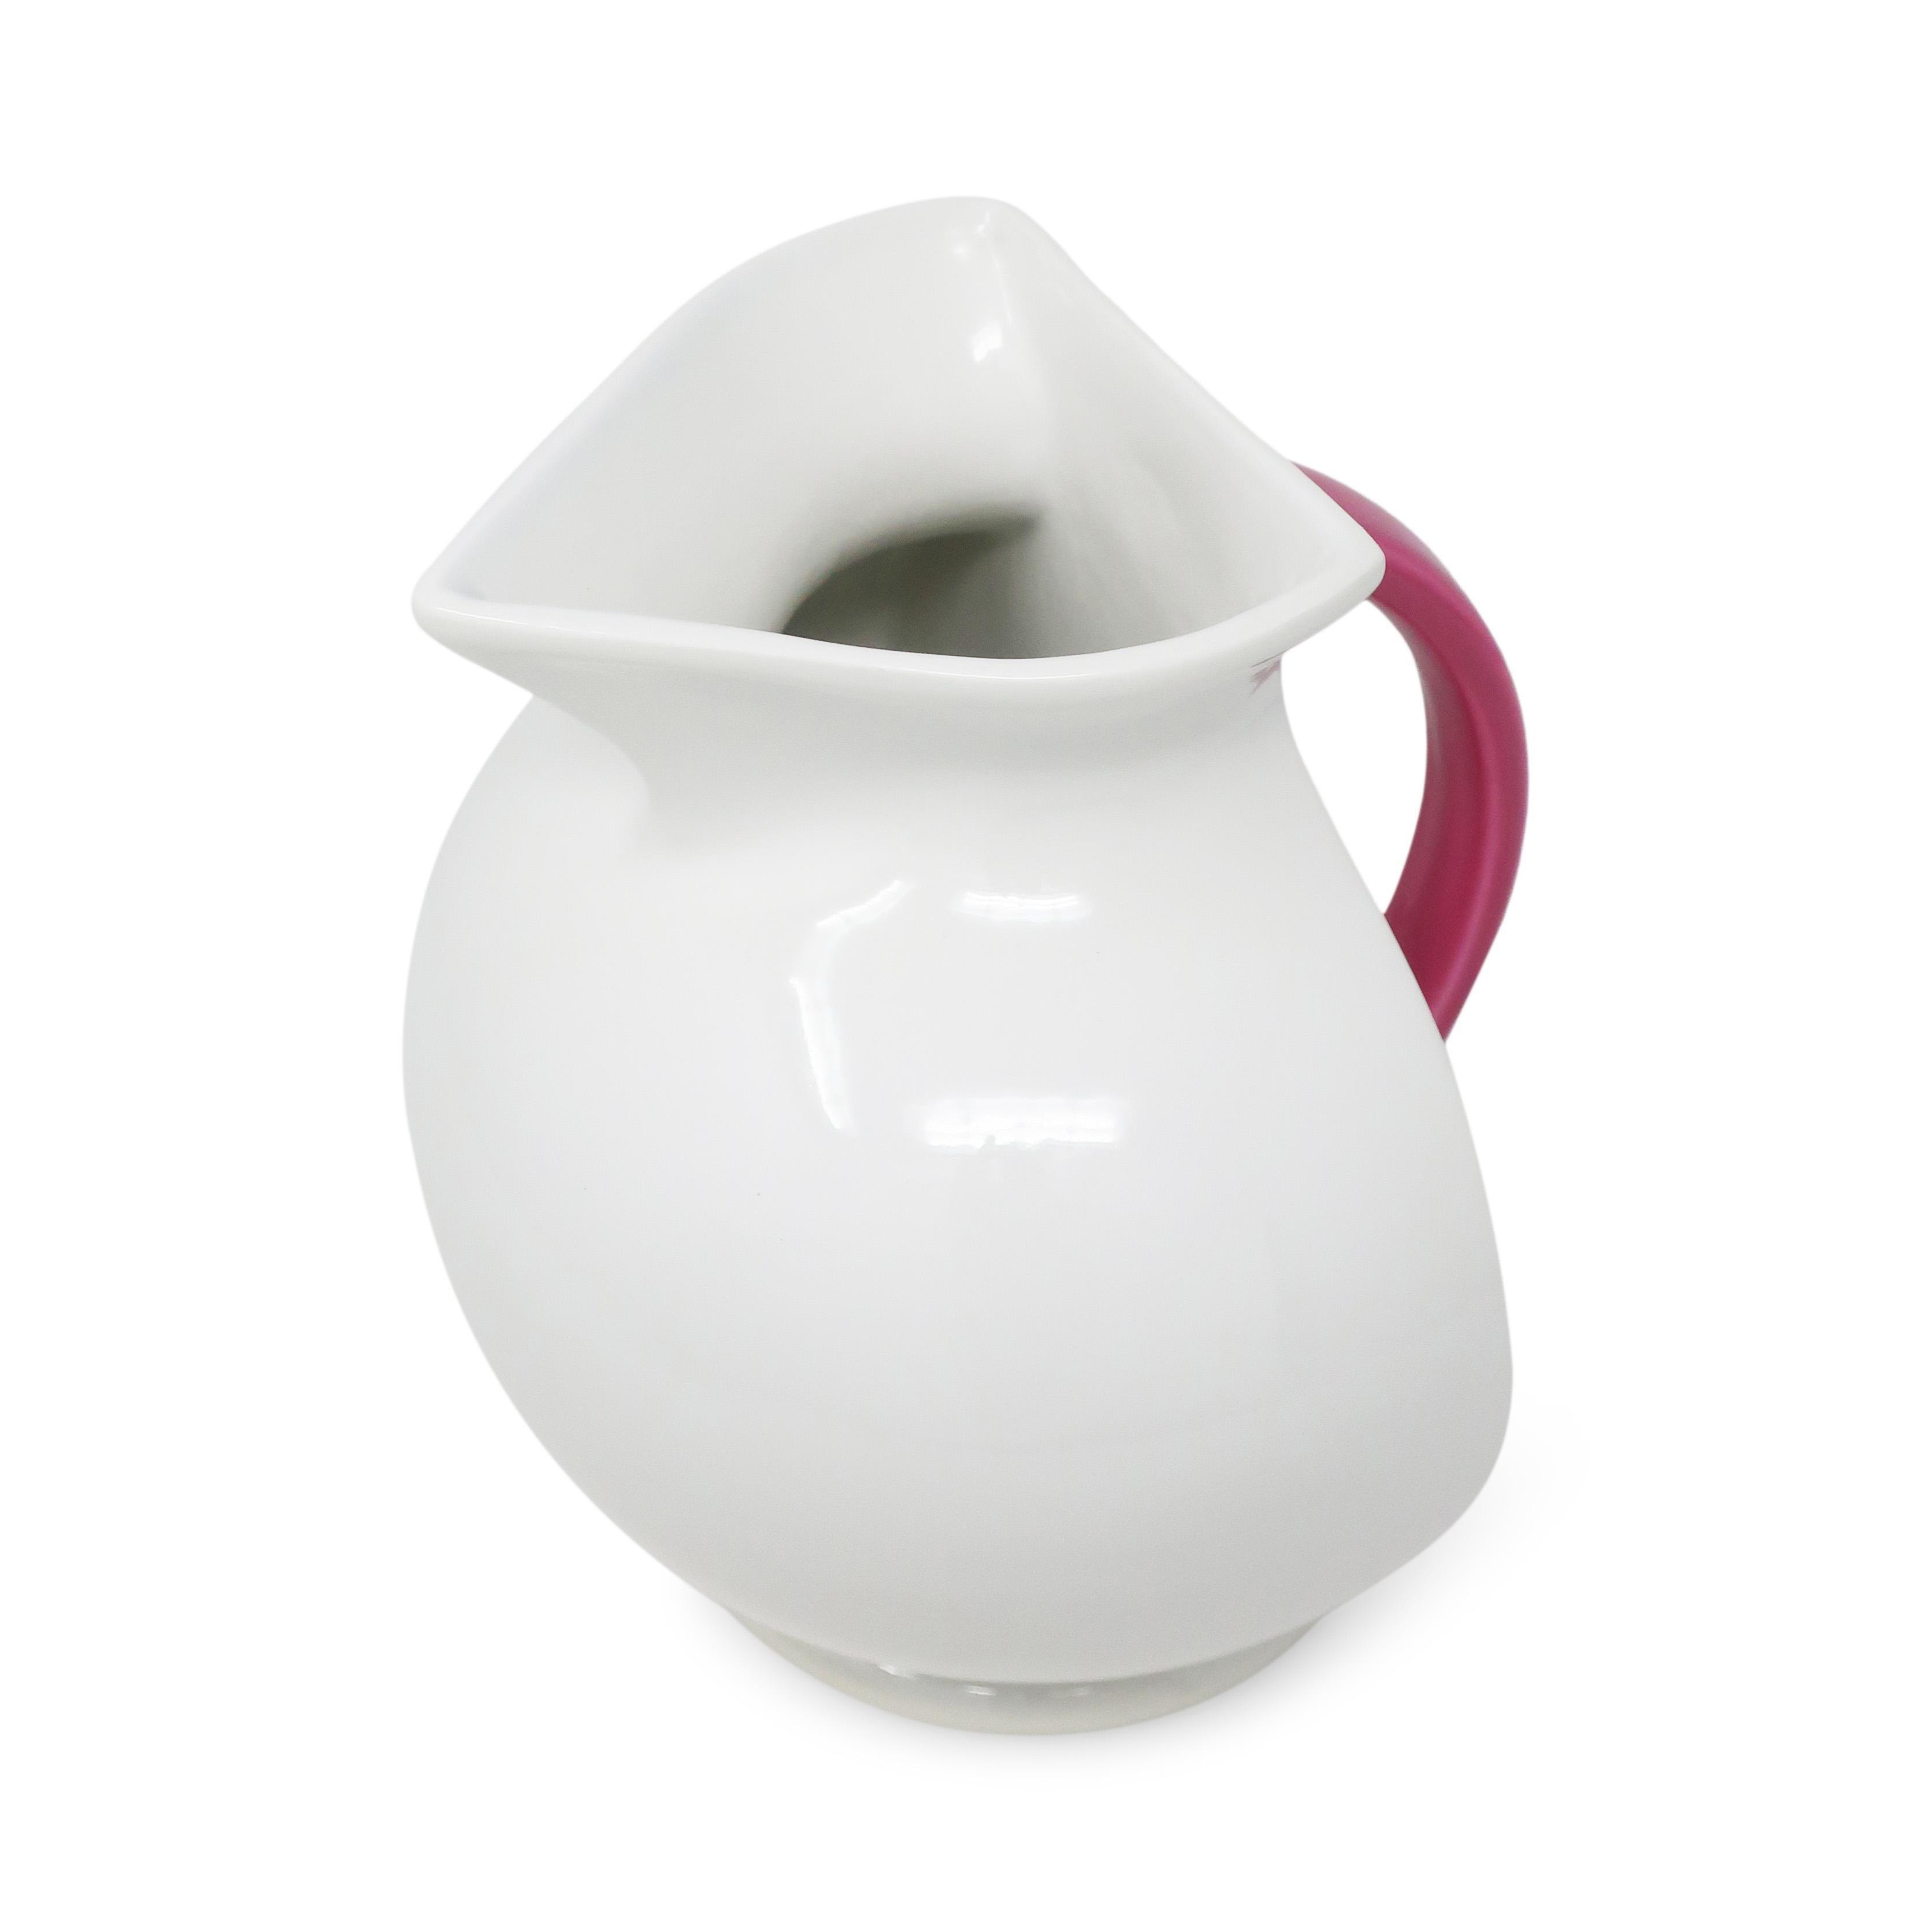 1980s Postmodern White Ceramic Pitcher by Marco Zanini for Bitossi For Sale 1